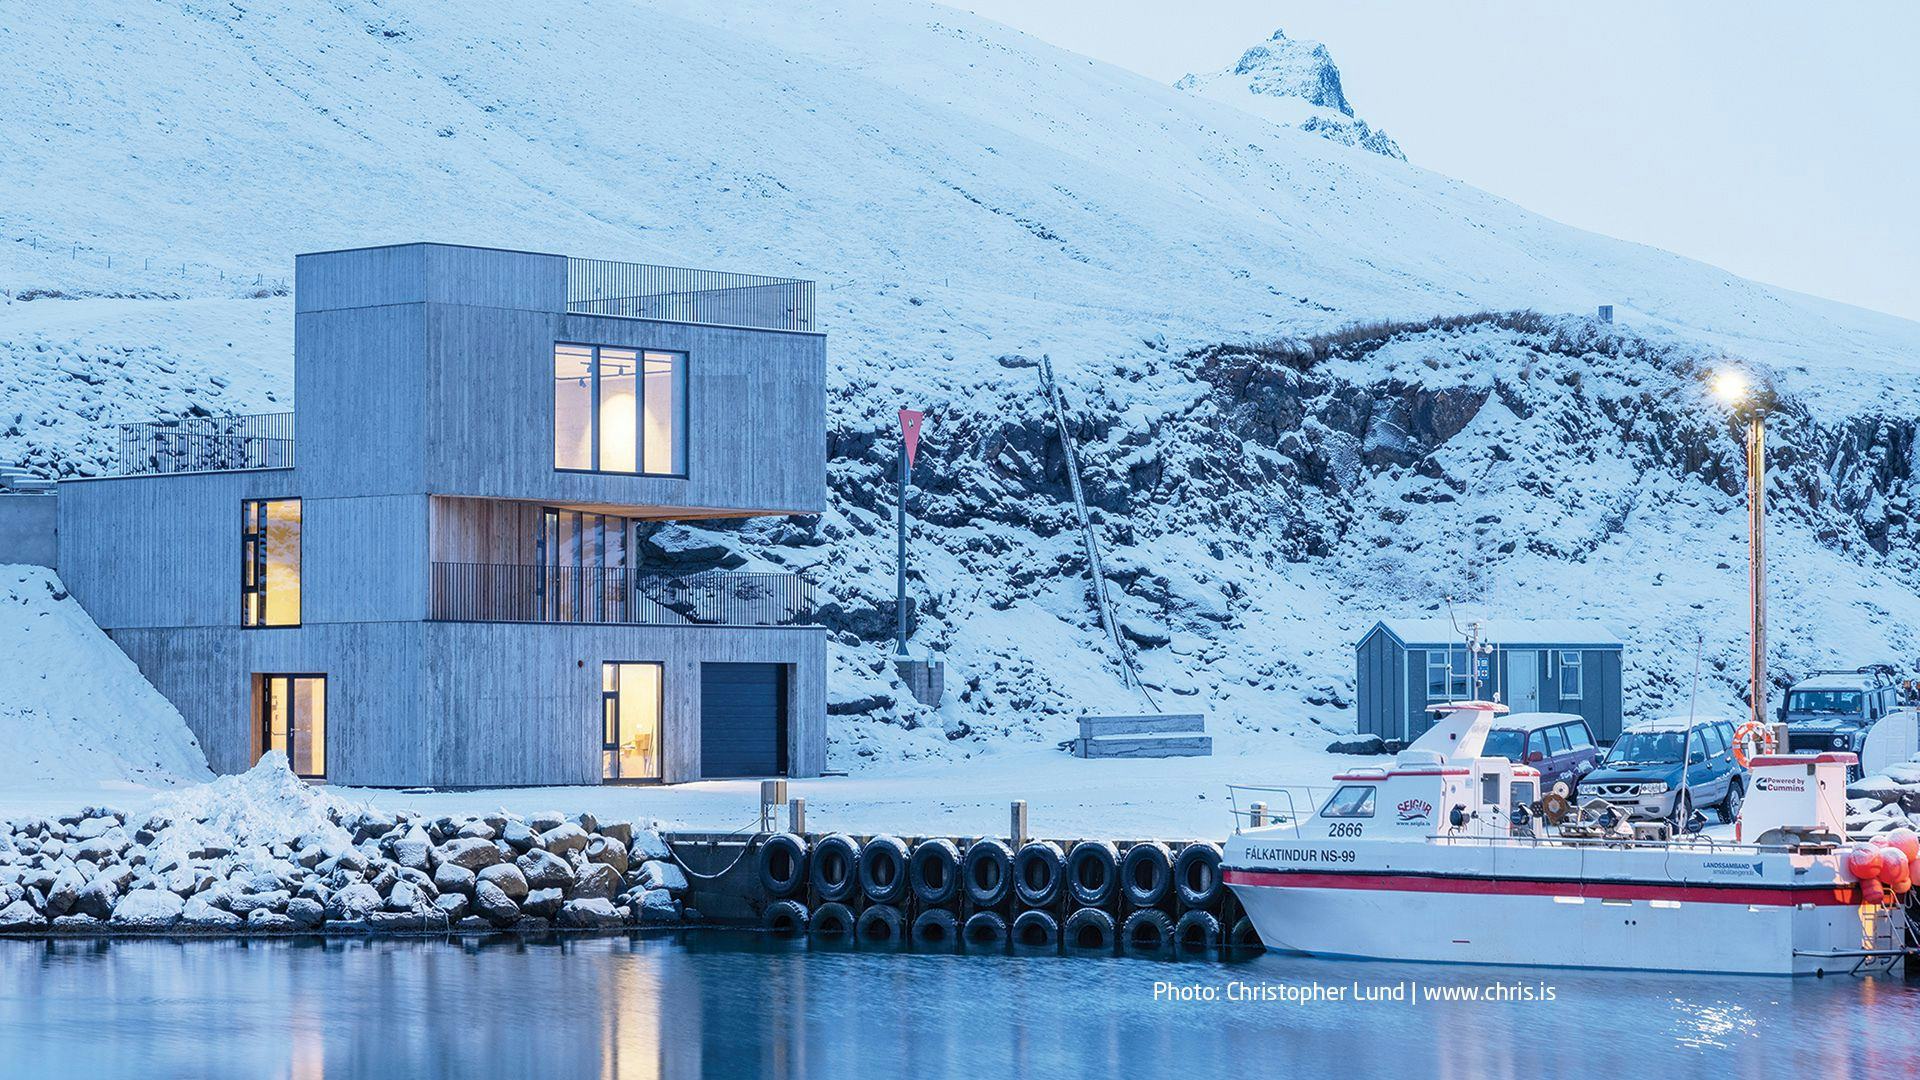 A modern architectural building by the water with a backdrop of a snowy mountain landscape and a boat docked at the pier